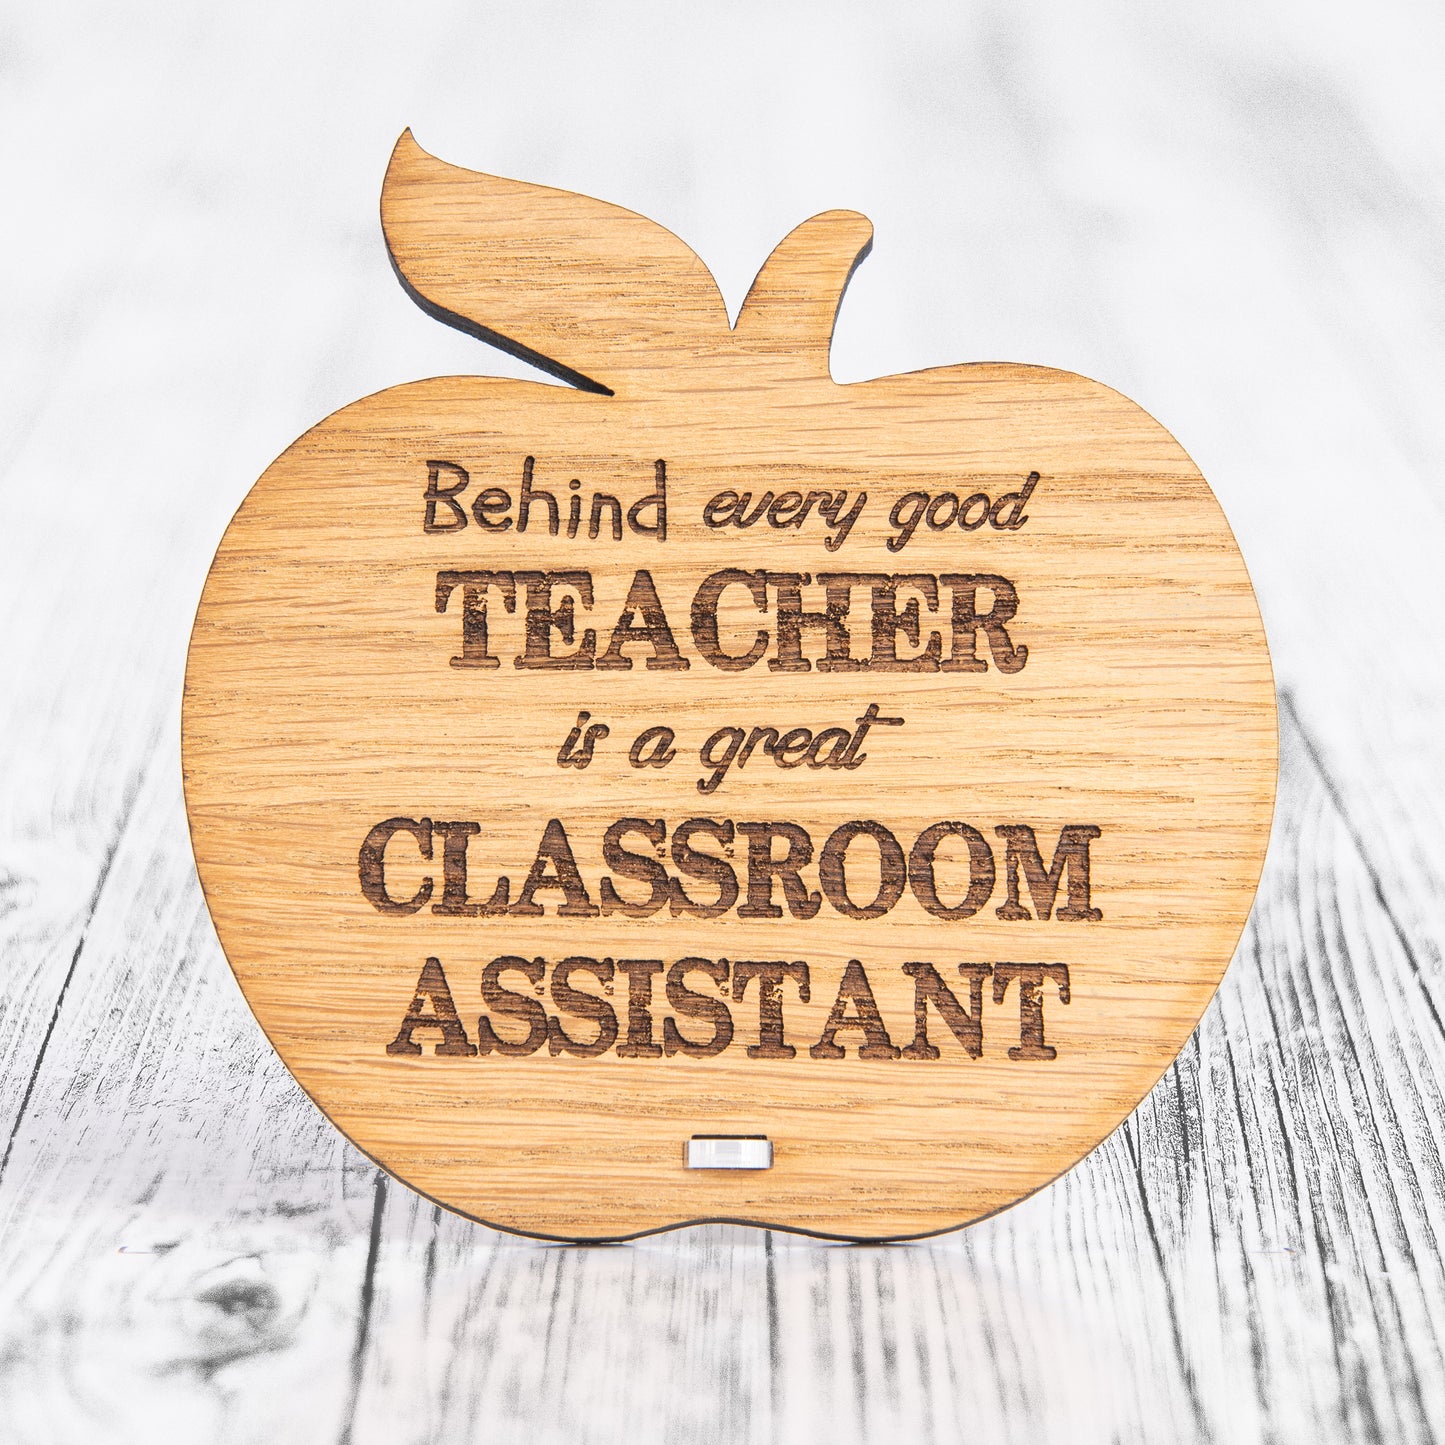 Personalised Classroom Assistant Gift - Wooden Apple Thank You Sign - End Of Term Present For Teaching Assistant